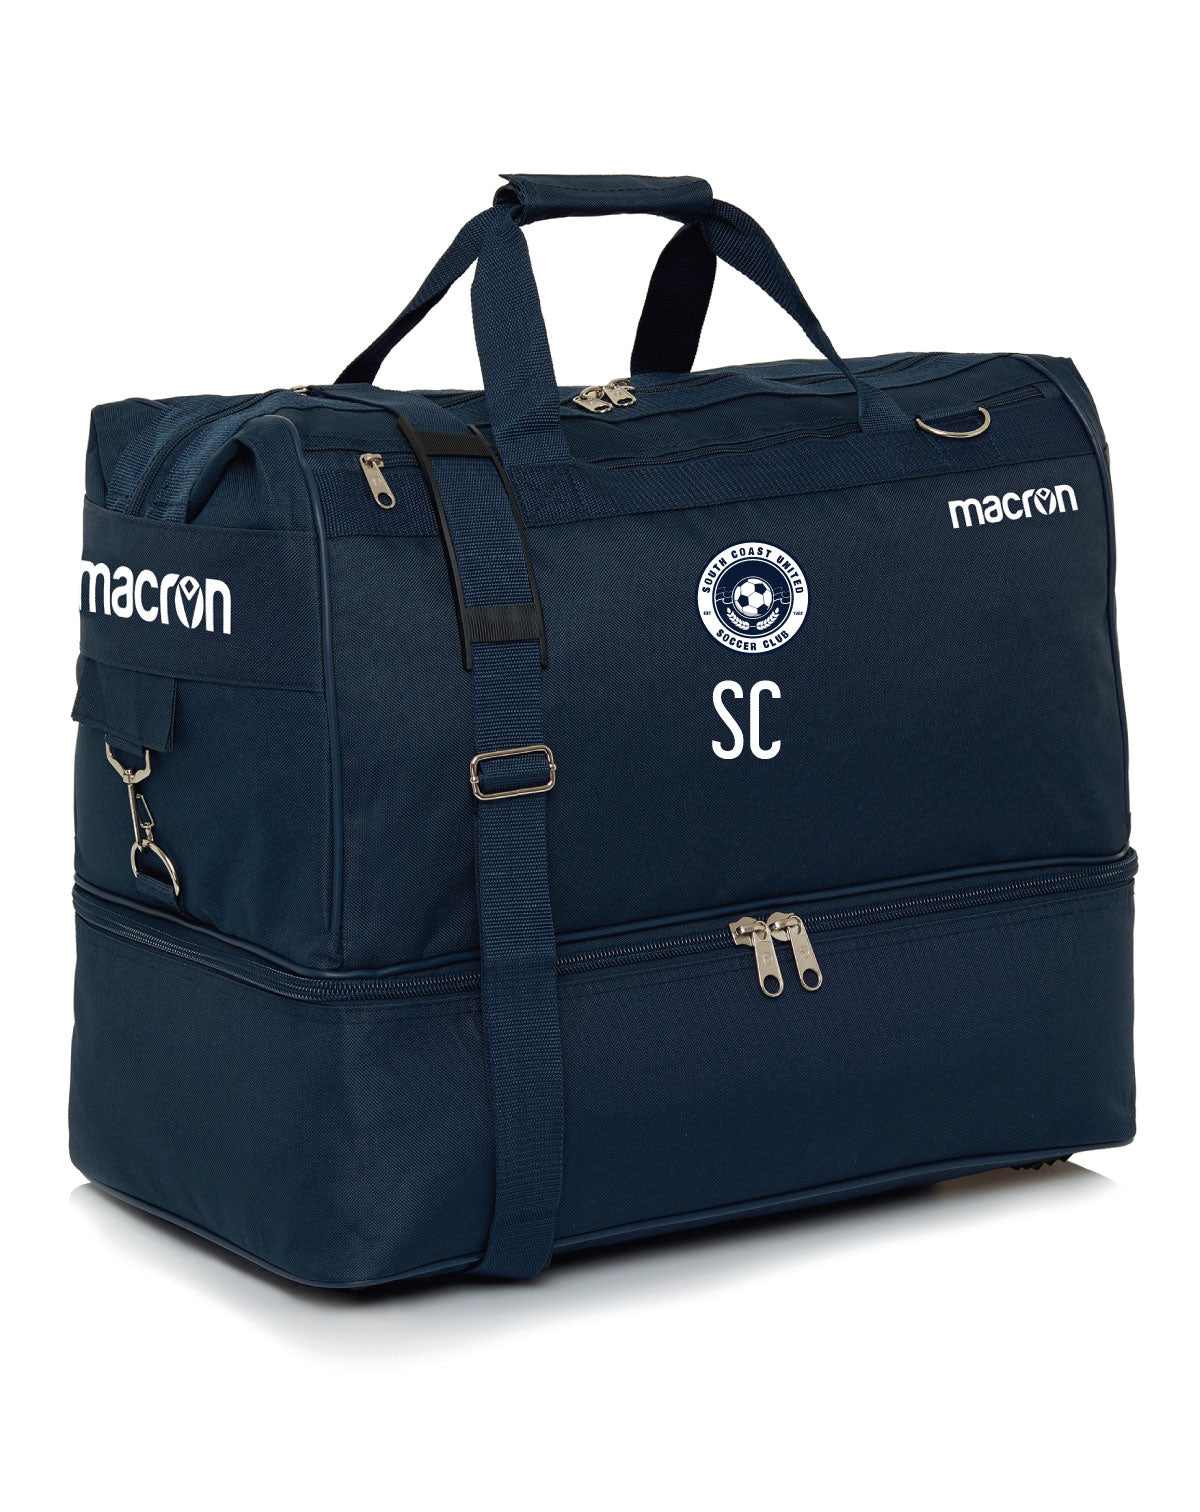 SCU APEX HOLDALL BAG - WITH INITIALS